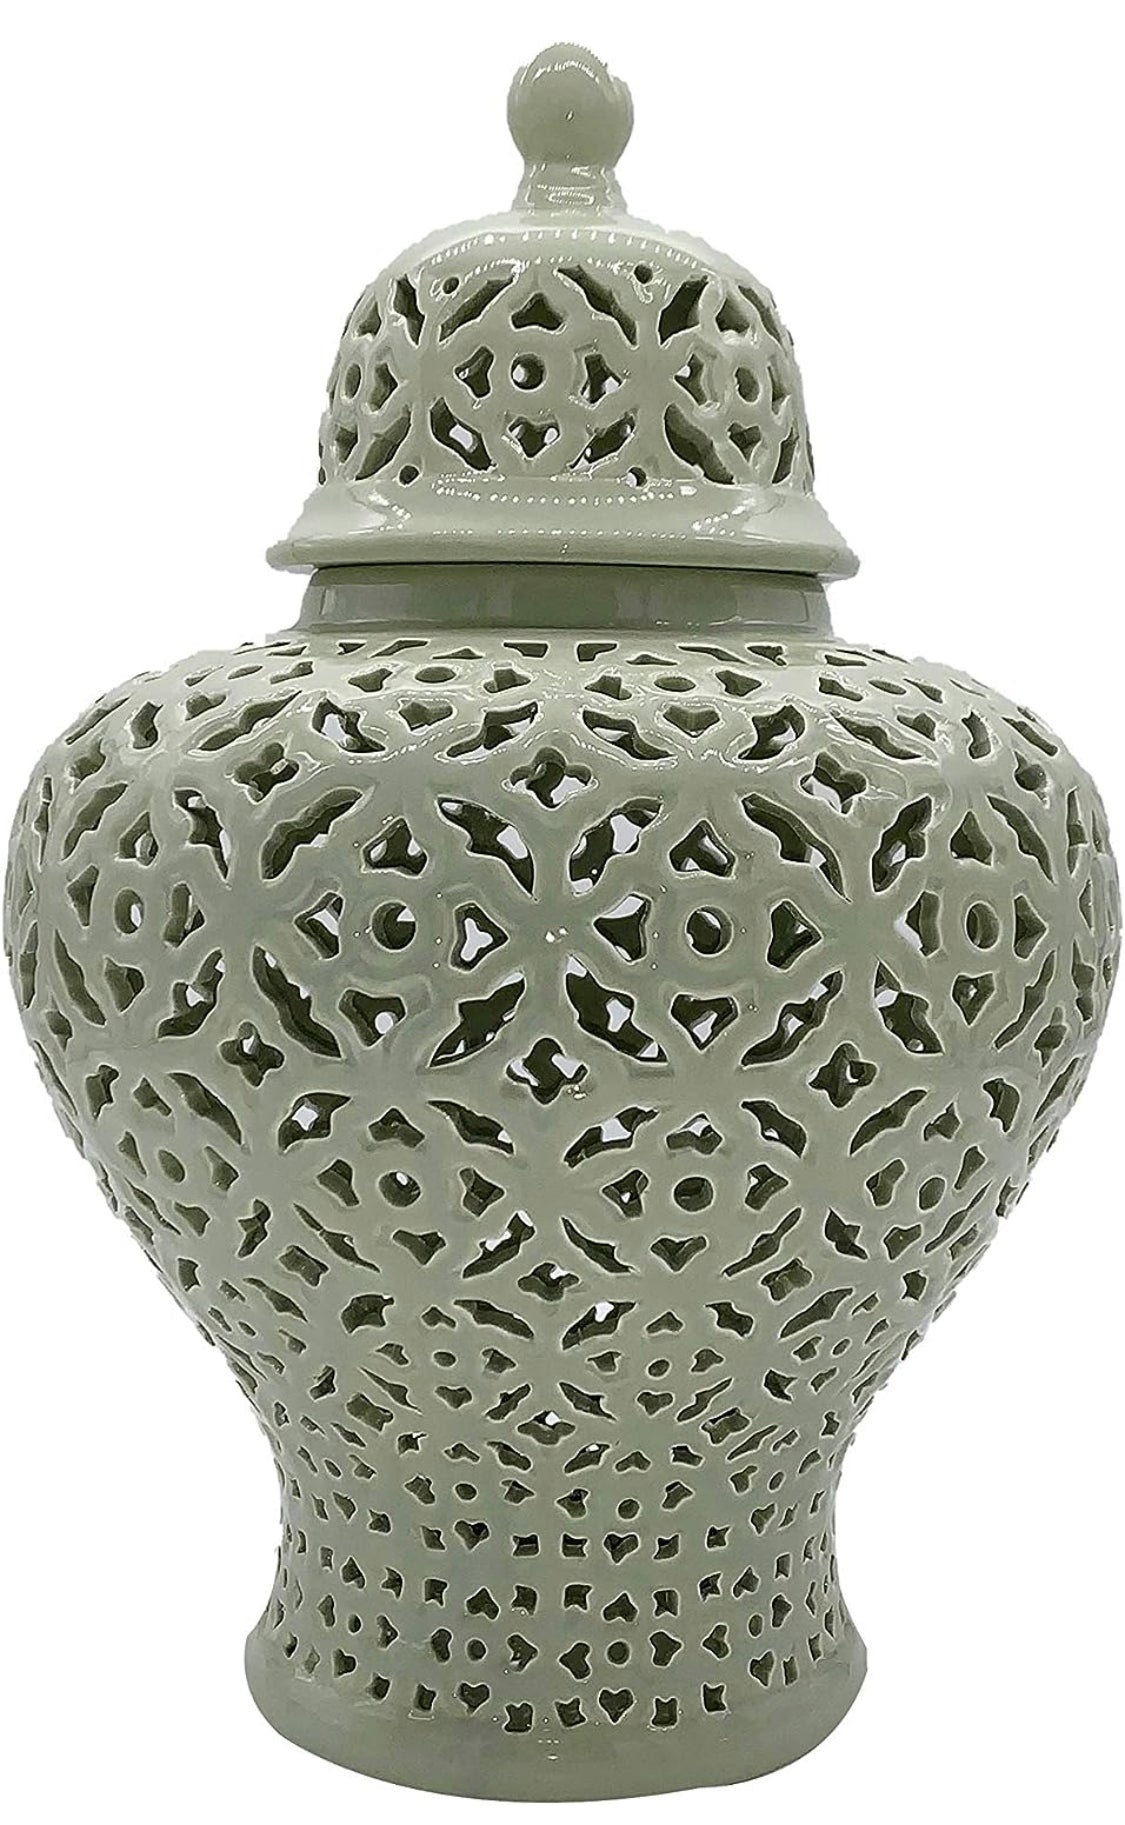 GT Direct 19.5” Lattice Ginger Jar with Lid - Stunning Home Decor with Intricate Mediterranean Inspired Lattice Work - Living Room and Kitchen Decoration - 19.5” (Sage Green)